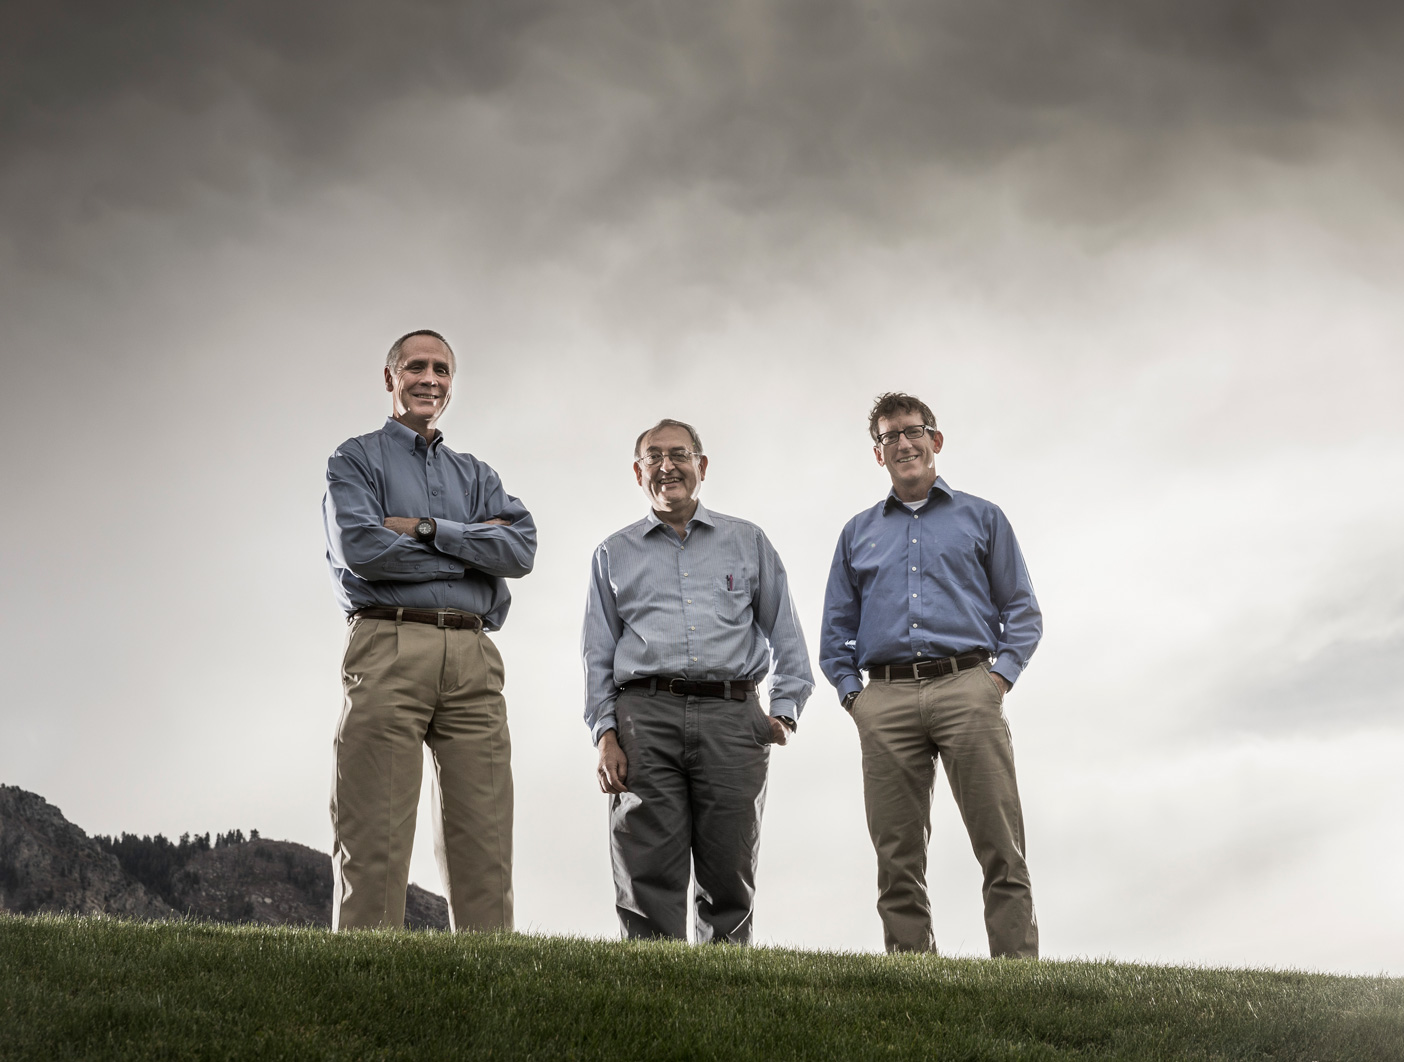 BYU professors Dennis Eggett, Lawrence Rees, and Mark Beecher pose under a gray sky.